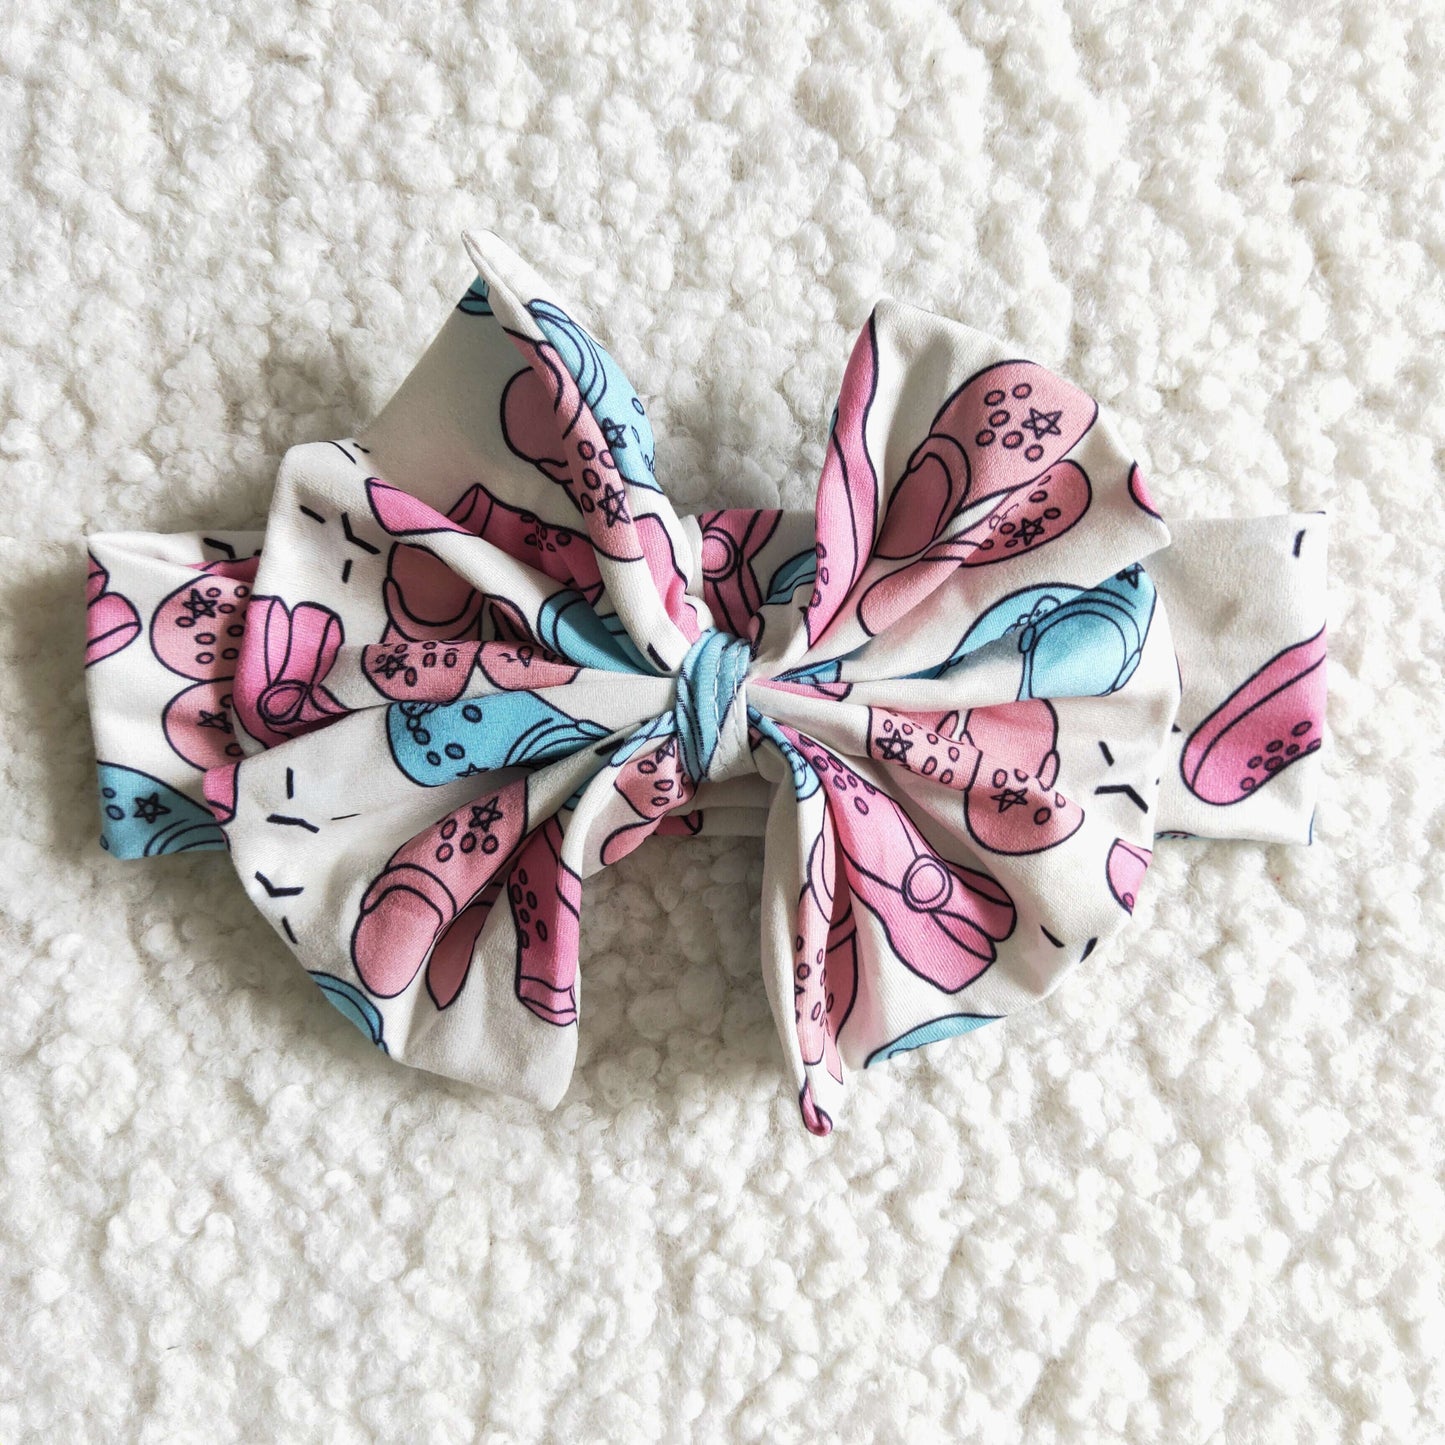 Baby girls letter print top summer bummie set with headband GBO0003